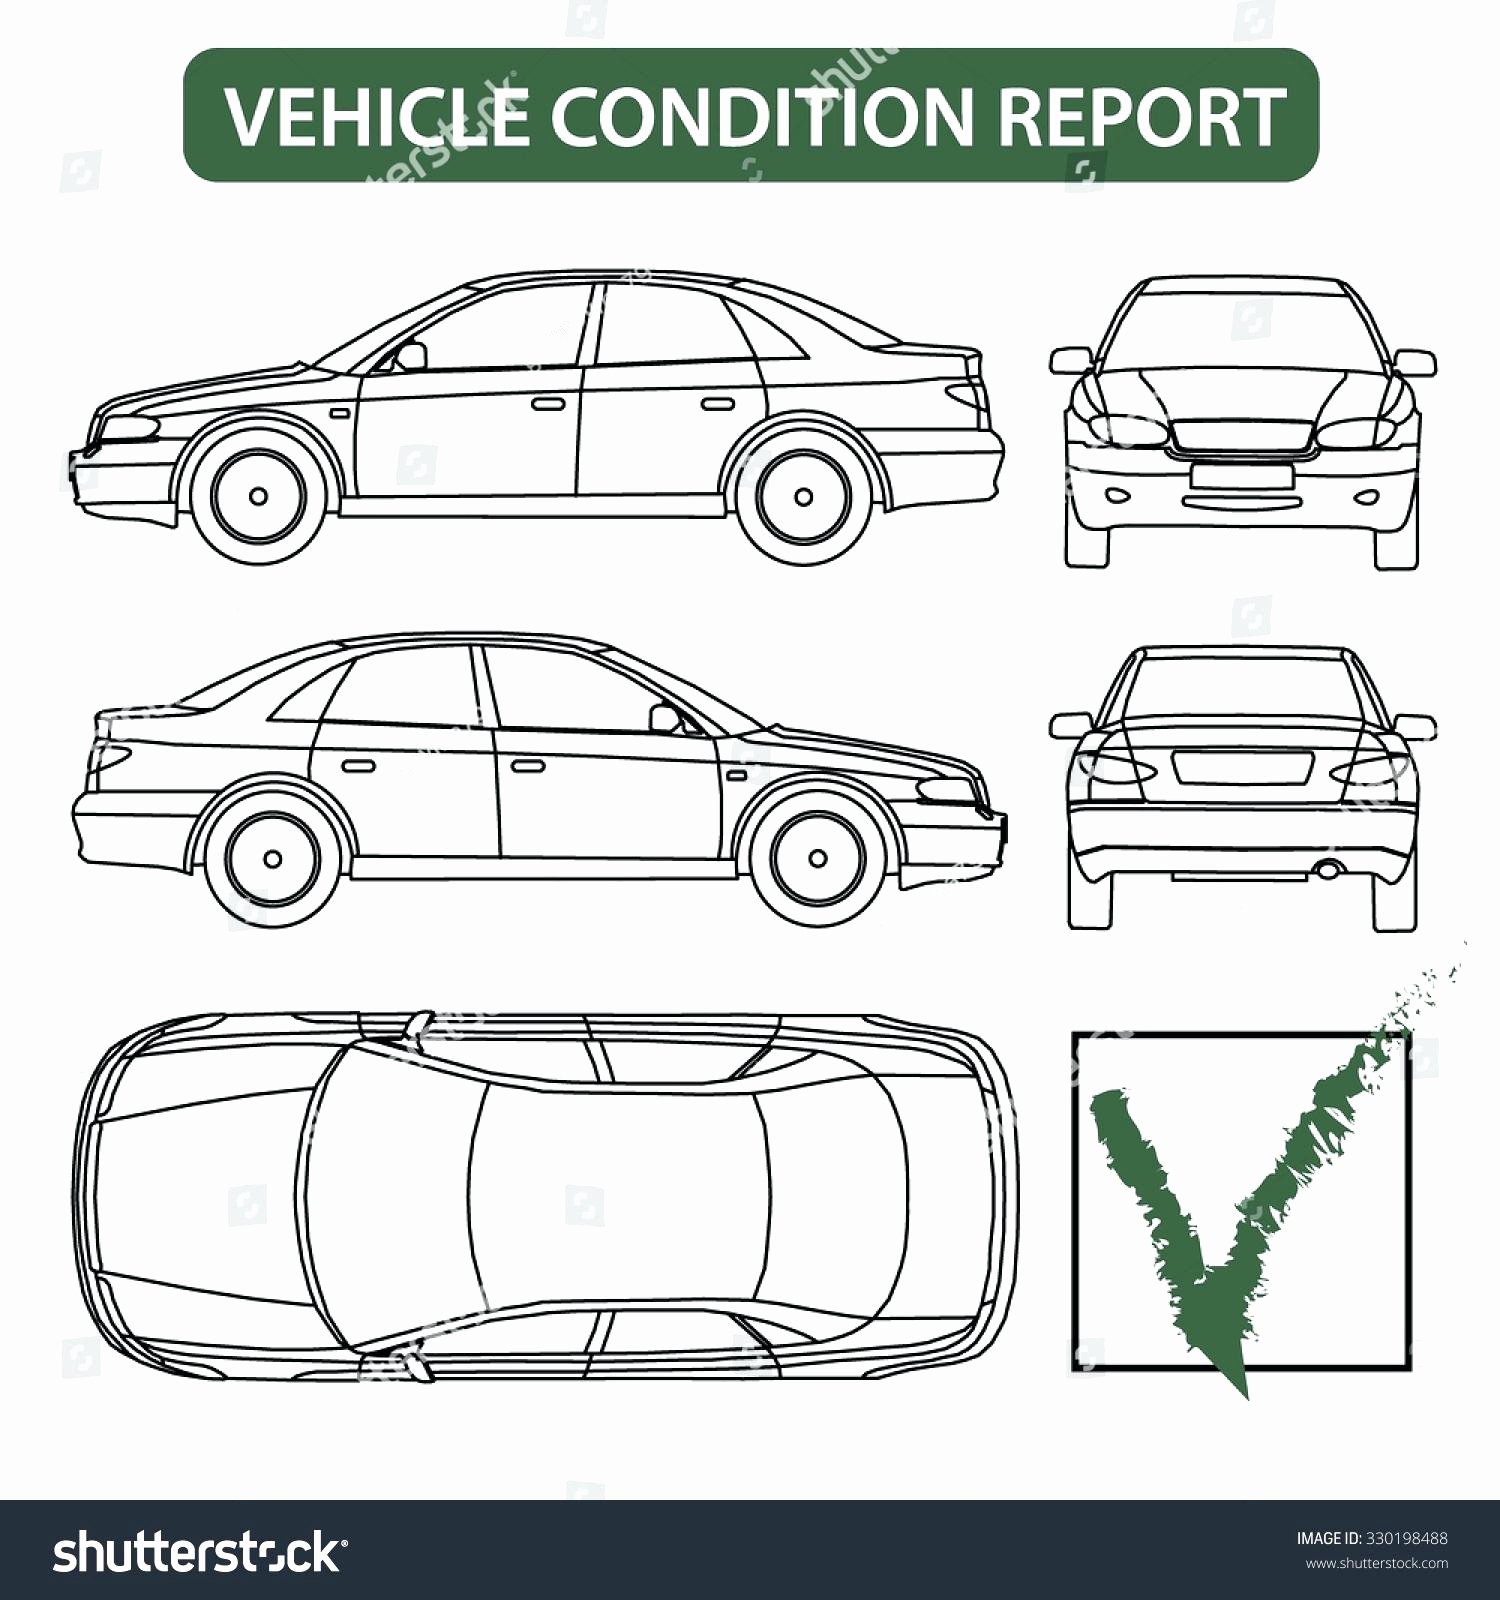 Check In Sheet Template Unique Template Vehicle Check In Sheet Template Accident Report